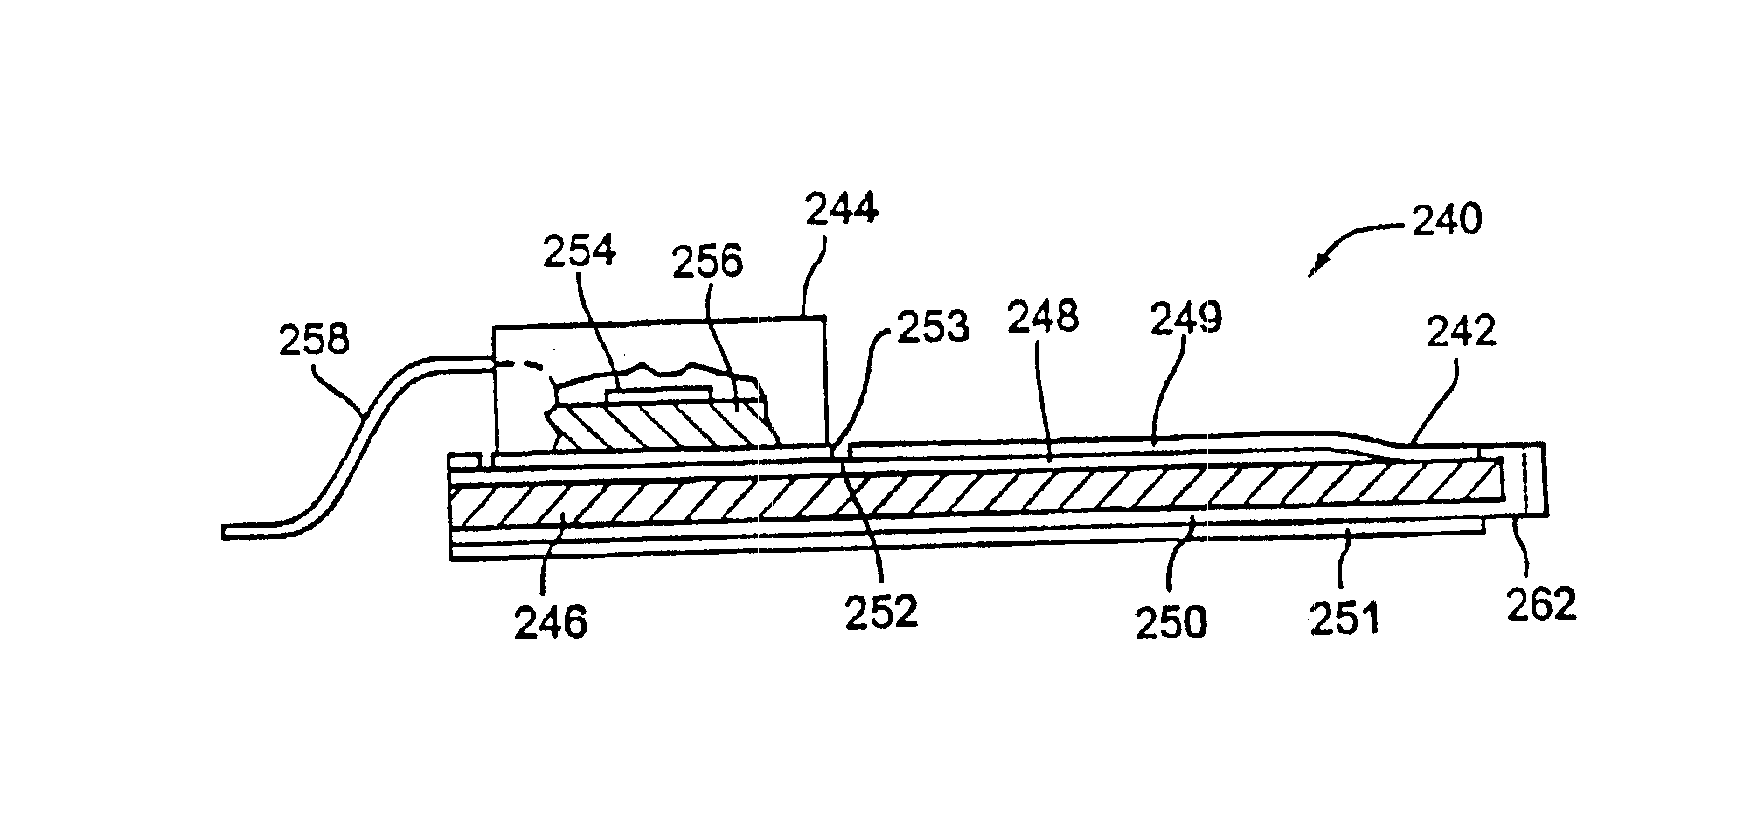 Electrical device including a voltage regulator mounted on a variable resistor